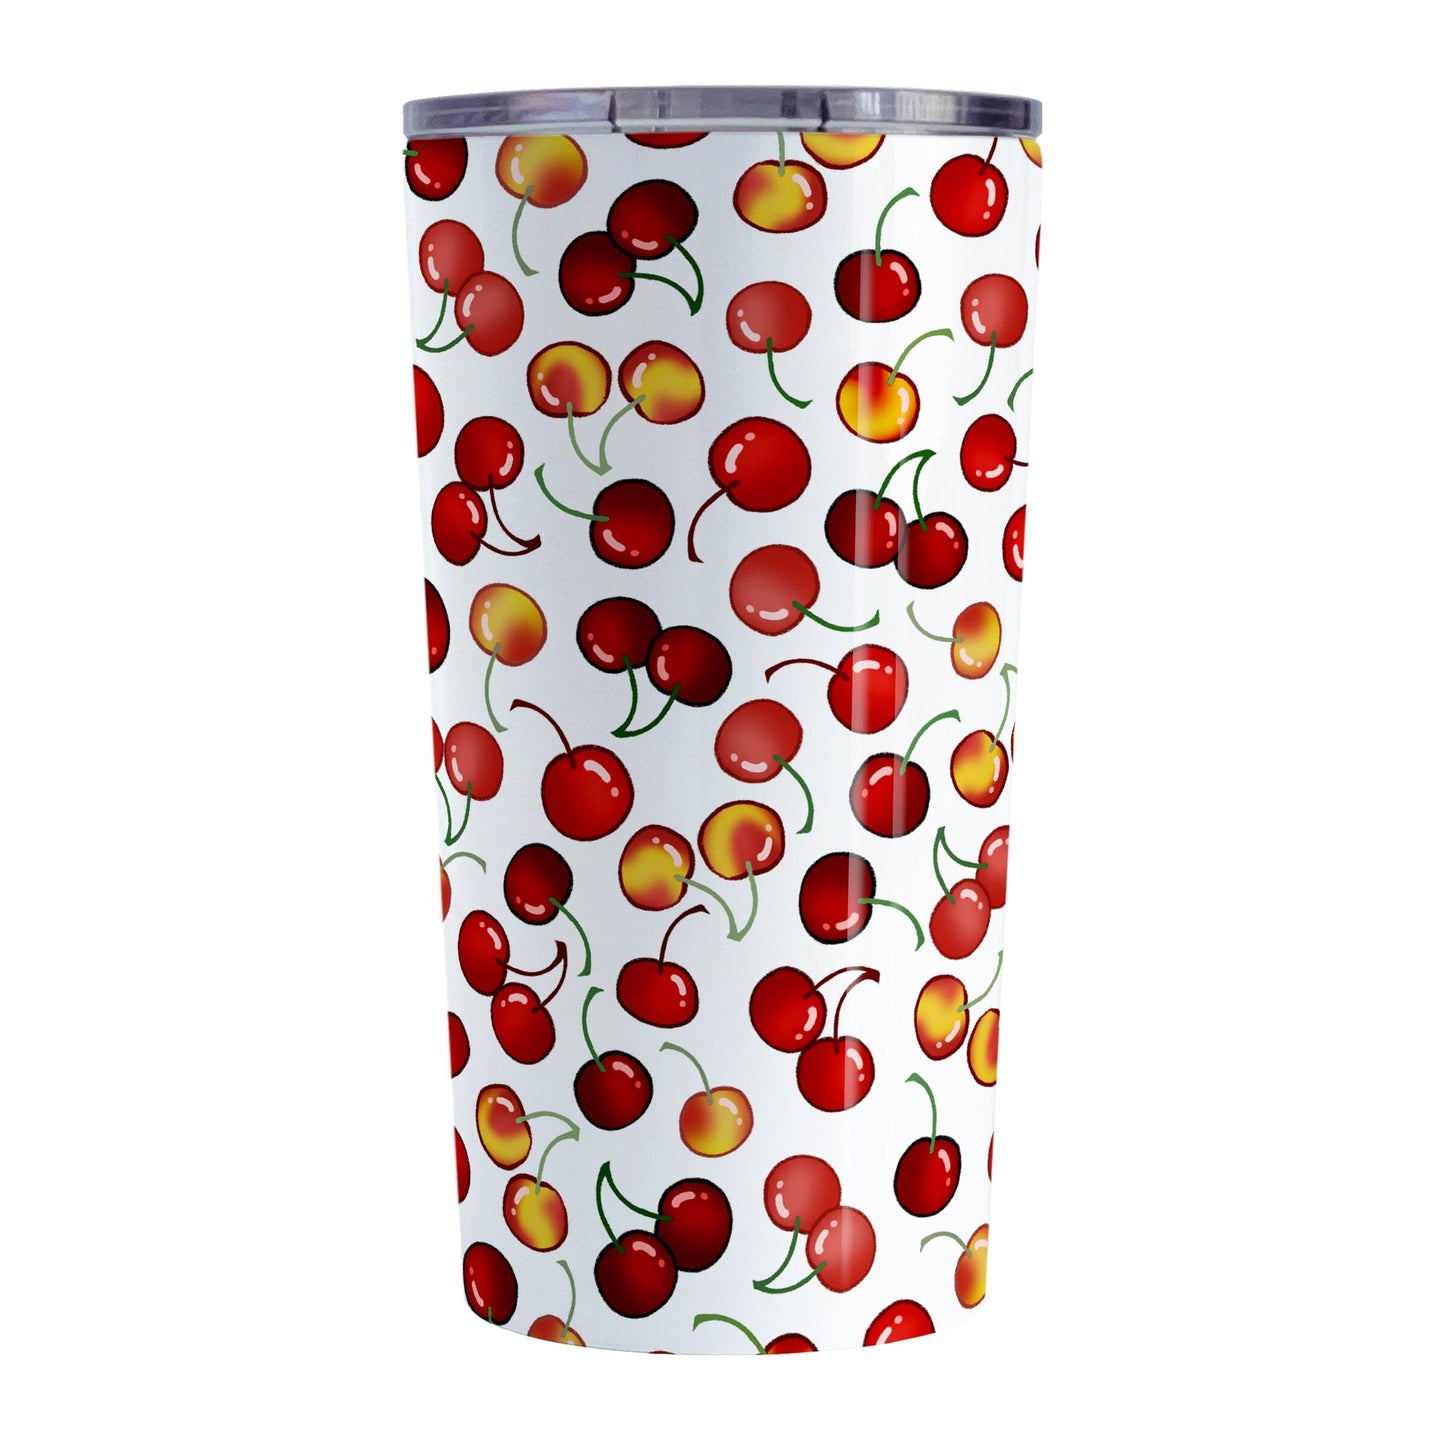 Cherries Tumbler Cup (20oz) at Amy's Coffee Mugs. A stainless steel tumbler cup designed with different types of cherries in a pattern that wraps around the cup.